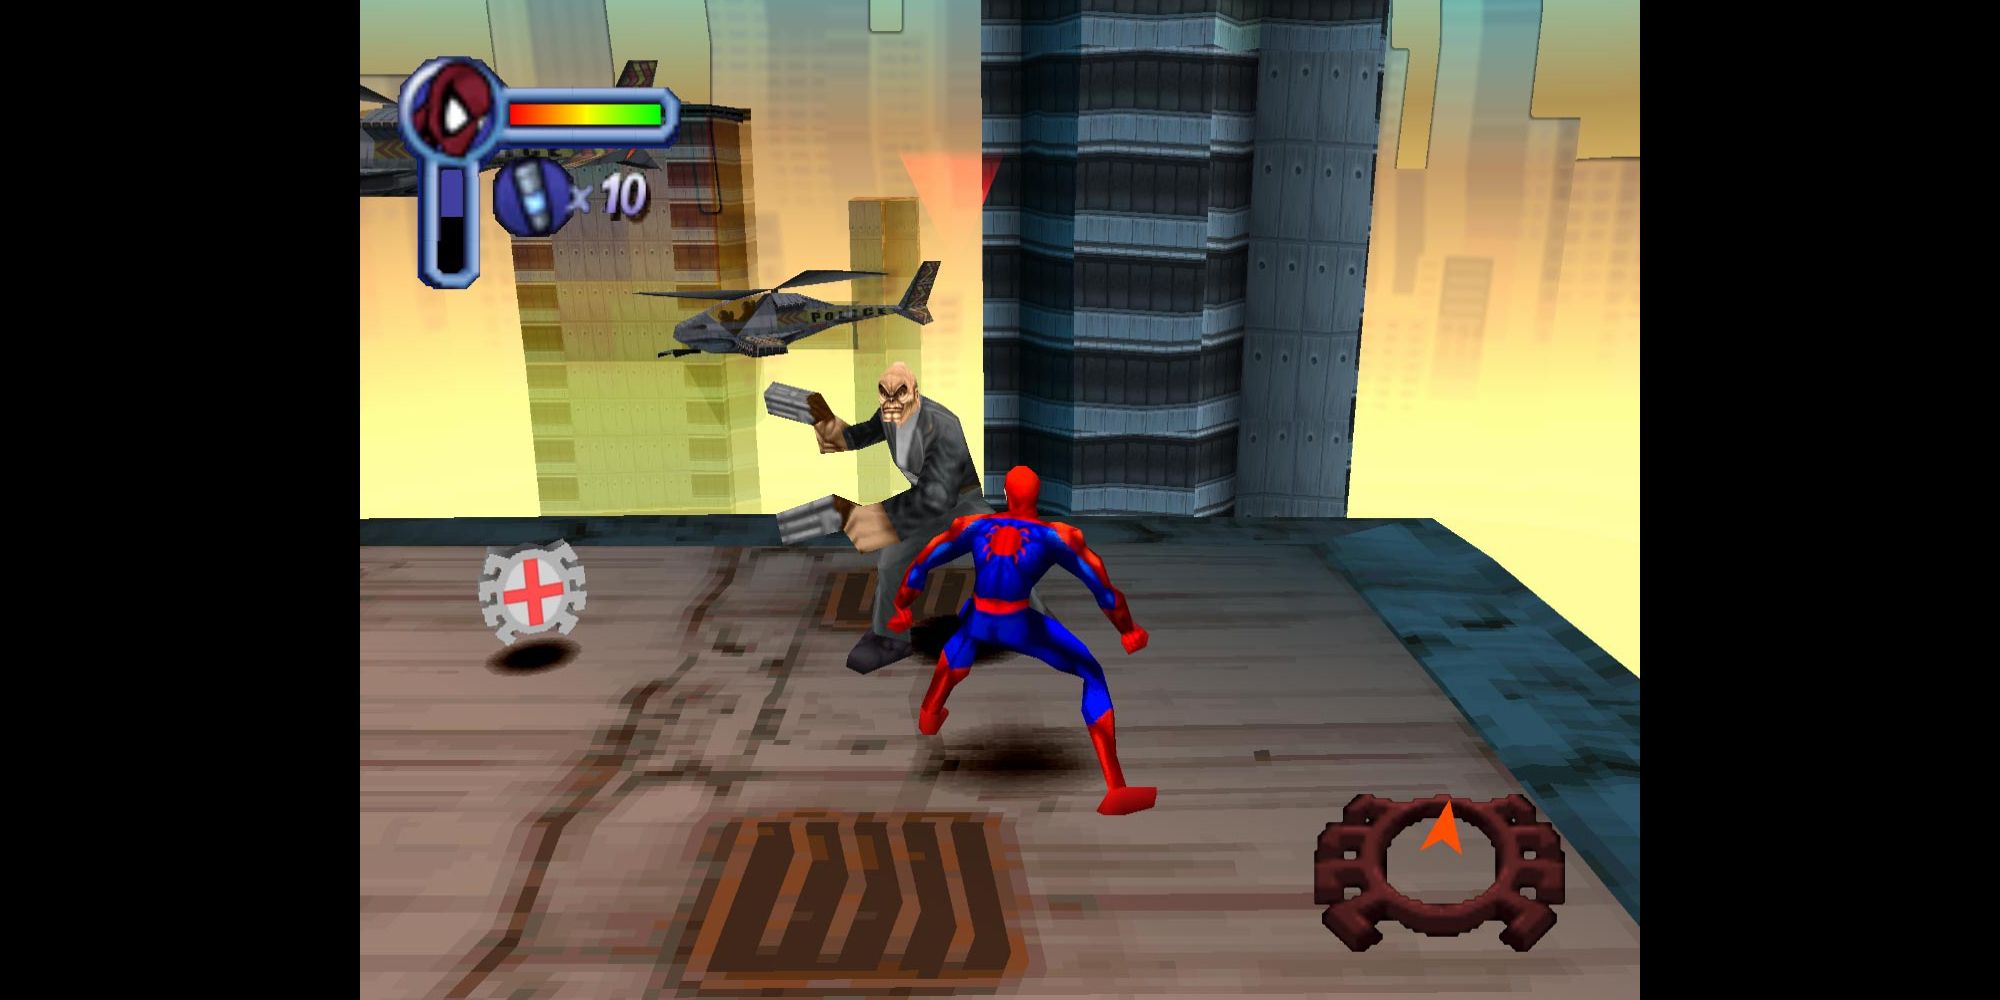 Spider-Man fights off an enemy with helicopters in the background in Spider-Man for PlayStation